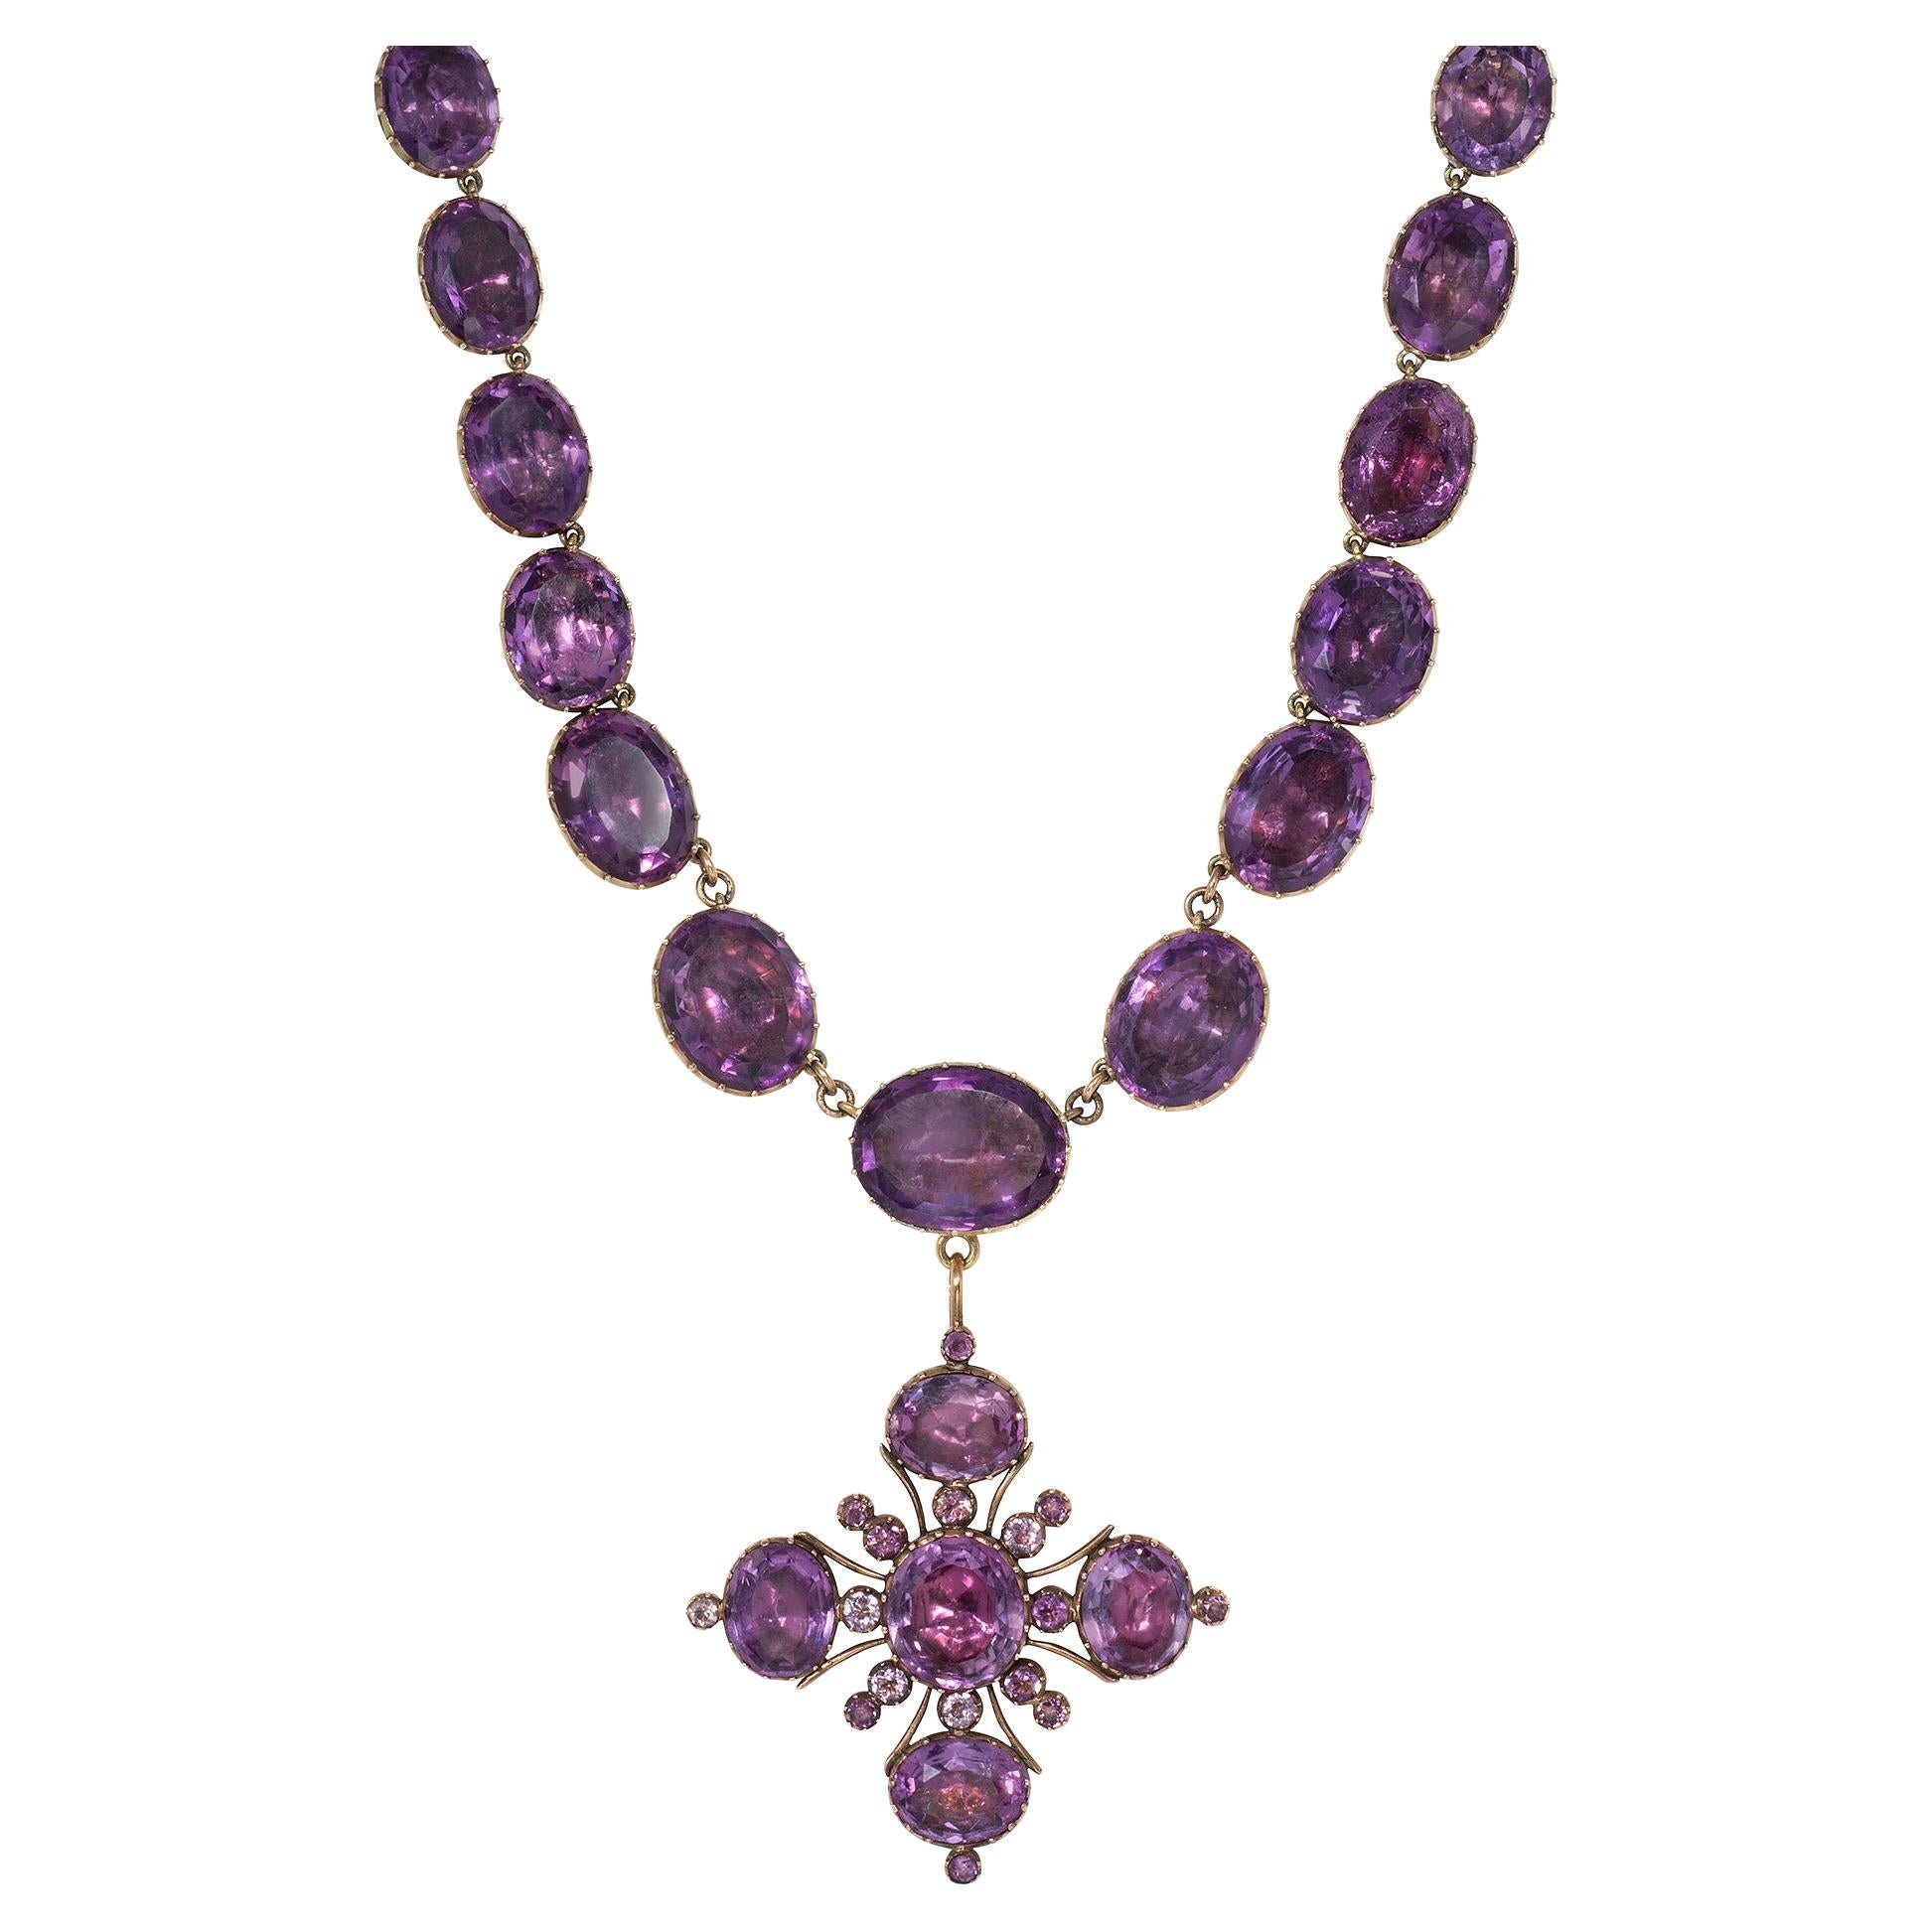 Antique Gold and Foiled Amethyst Rivière Necklace with Detachable Maltese Cross For Sale